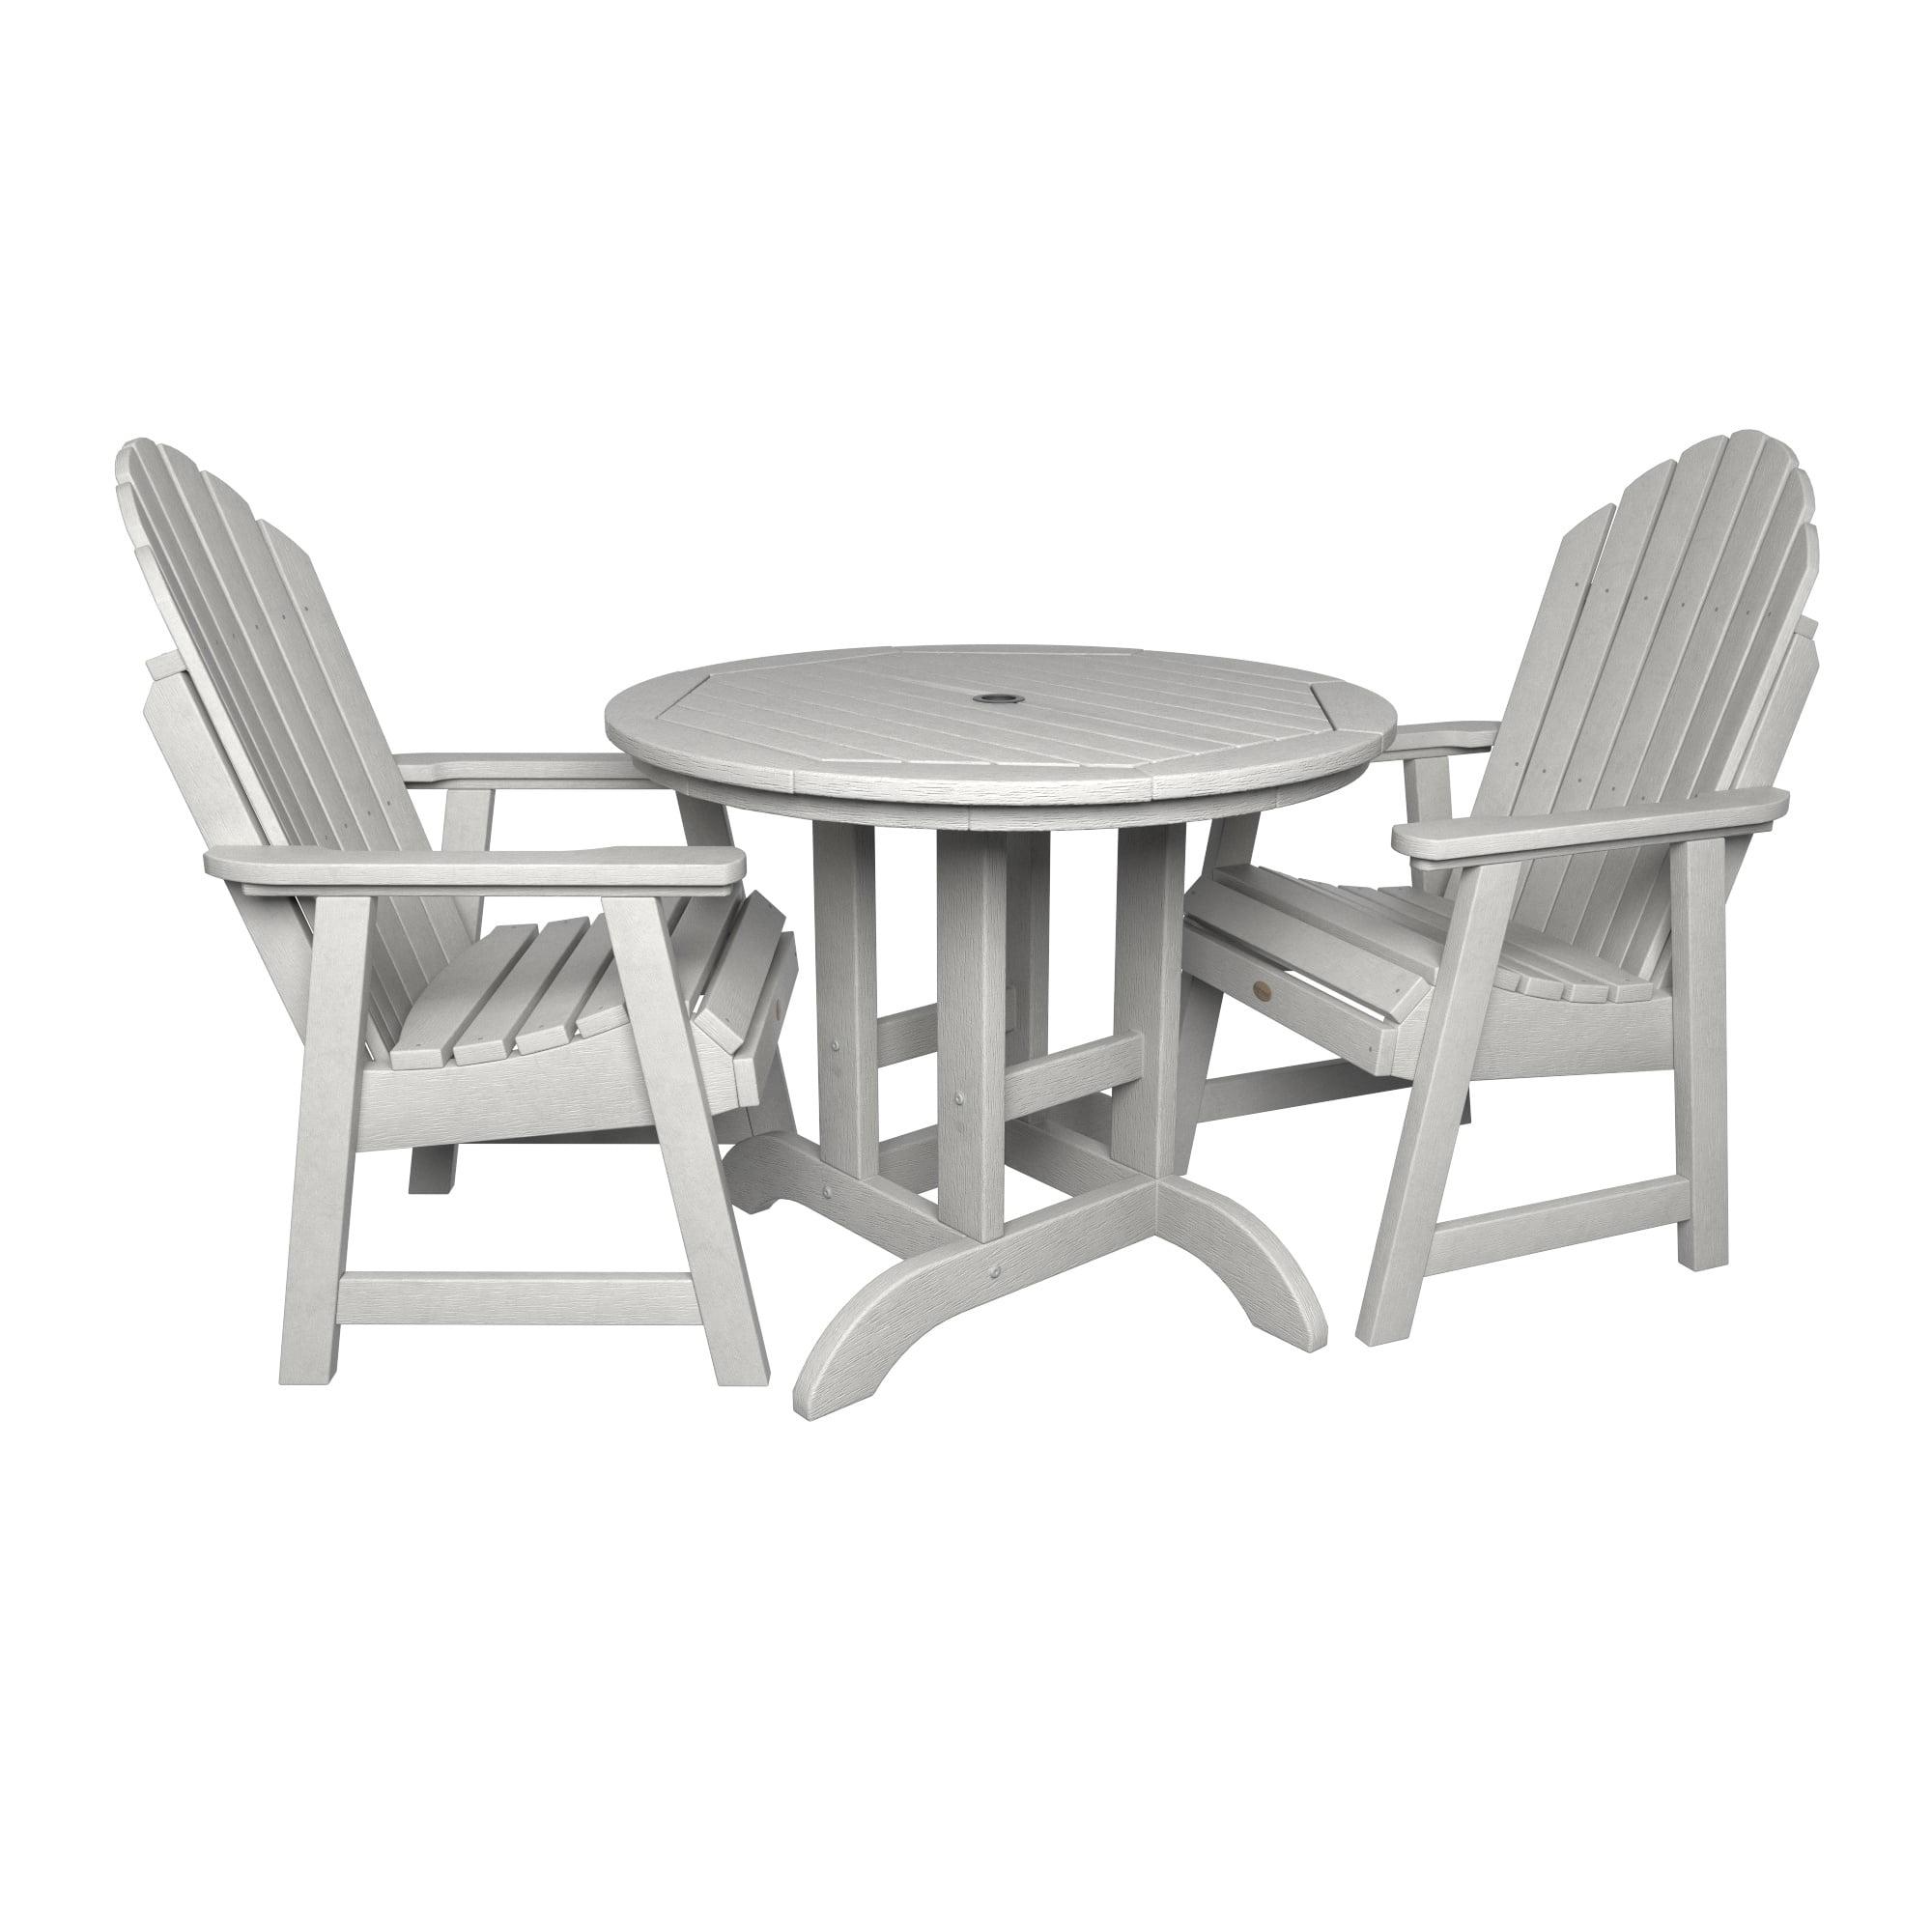 White Wood-Grain 3-Piece Adirondack Patio Dining Set for Two